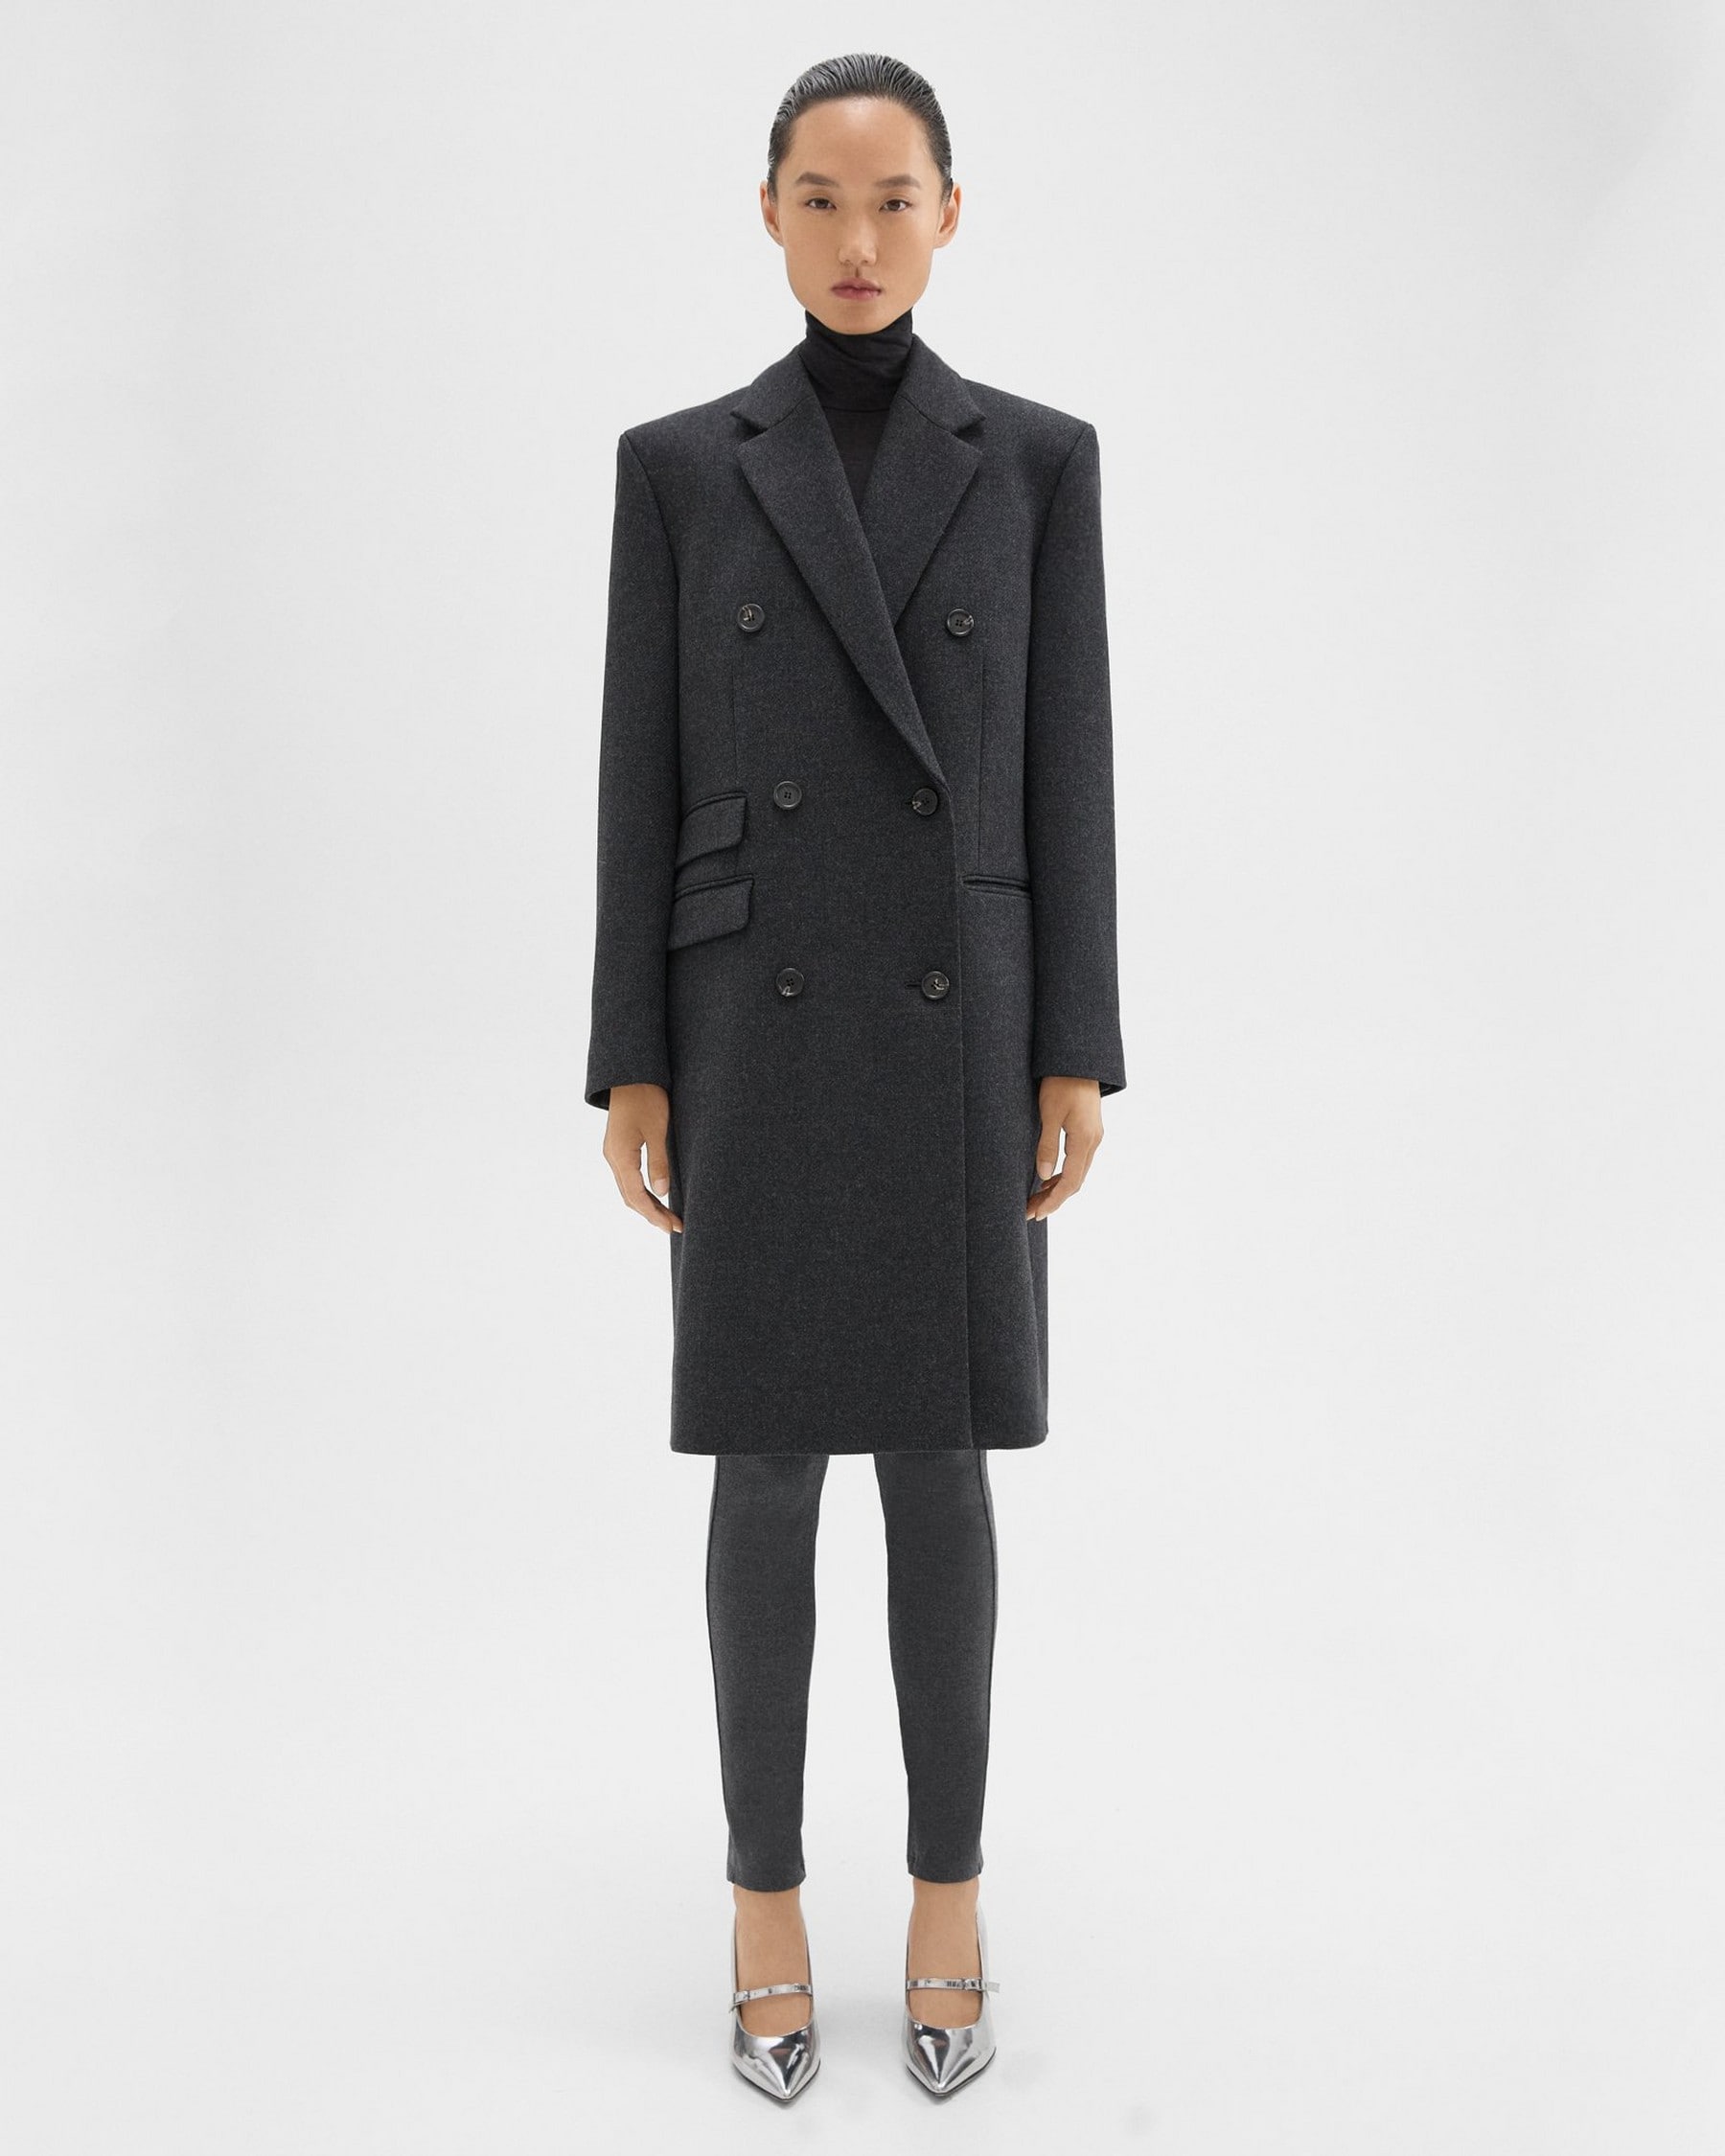 Theory Double-Breasted Coat in Circle Wool